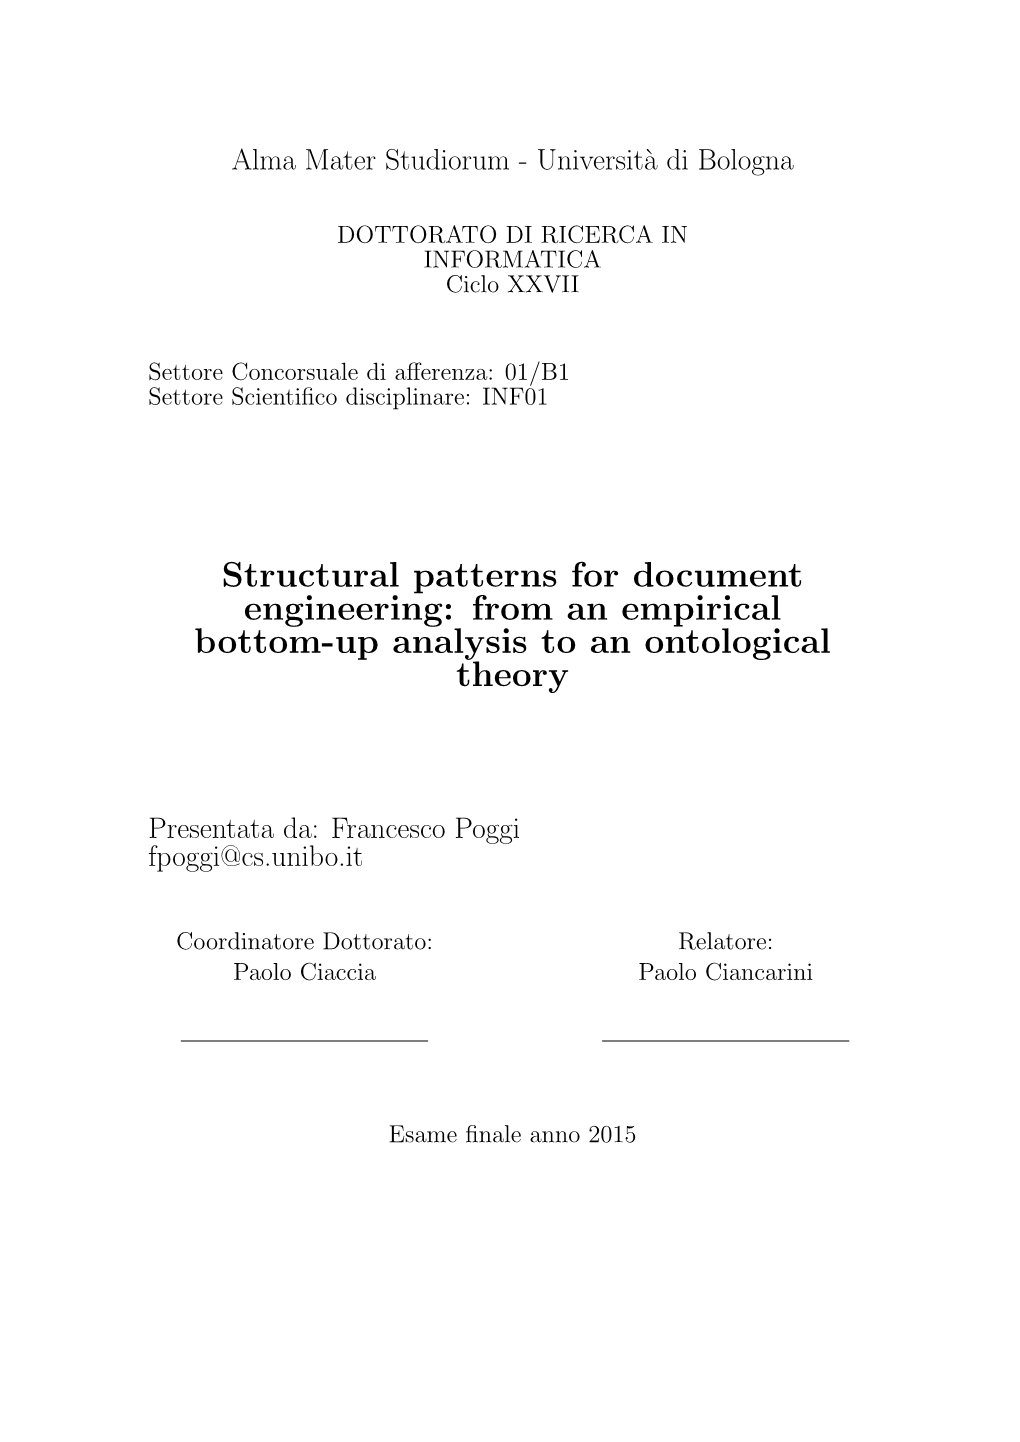 Structural Patterns for Document Engineering: from an Empirical Bottom-Up Analysis to an Ontological Theory